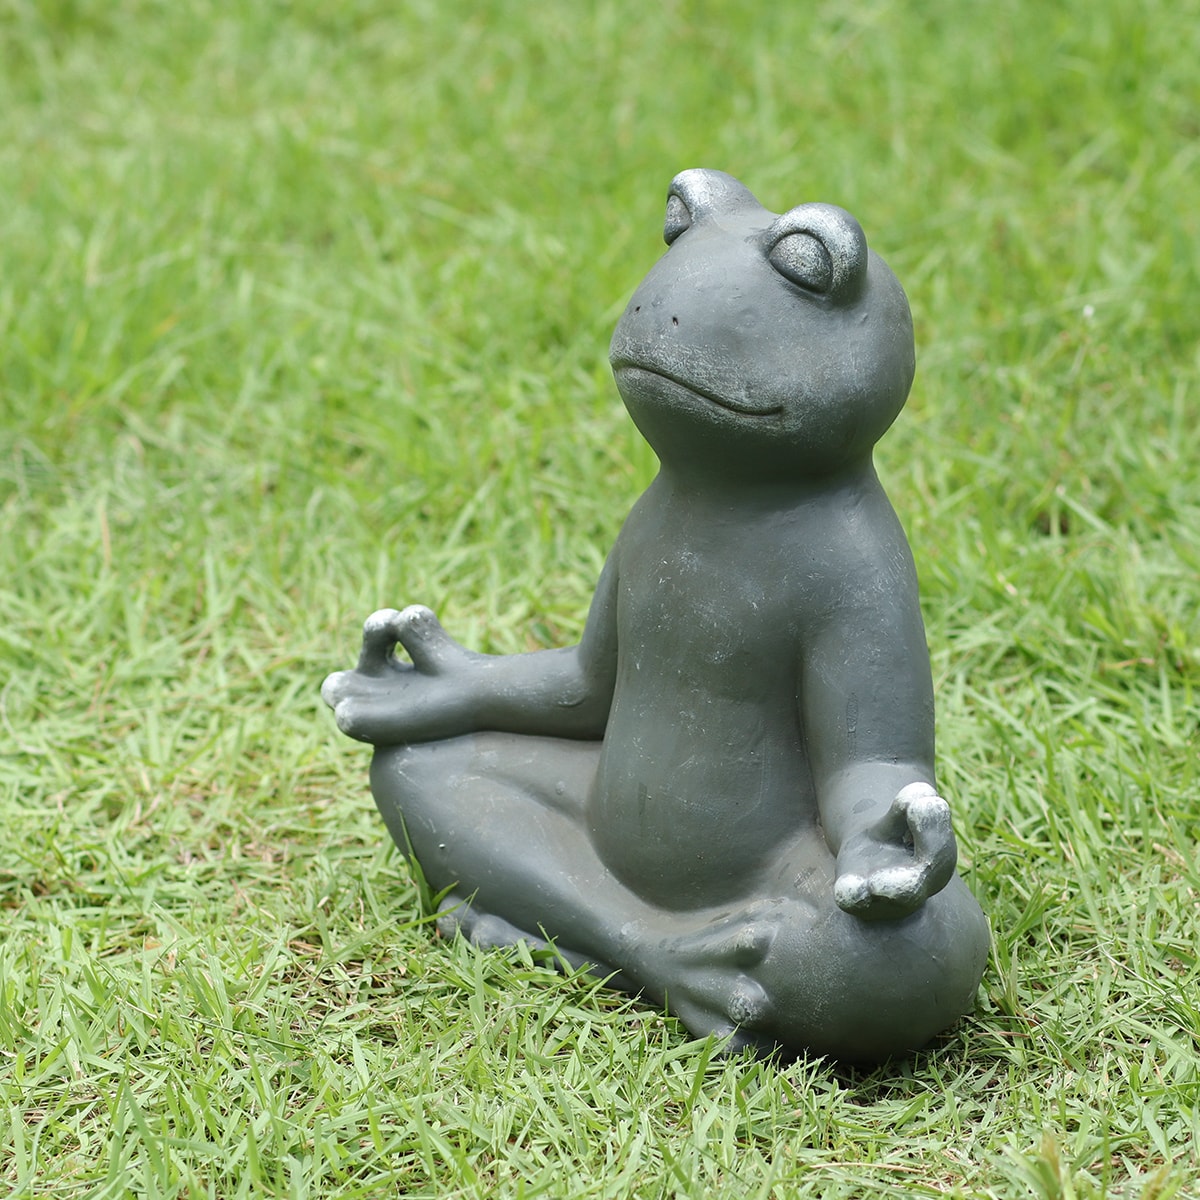 Style Selections 11.75-in H x 12.5-in W Gray Frog Garden Statue in